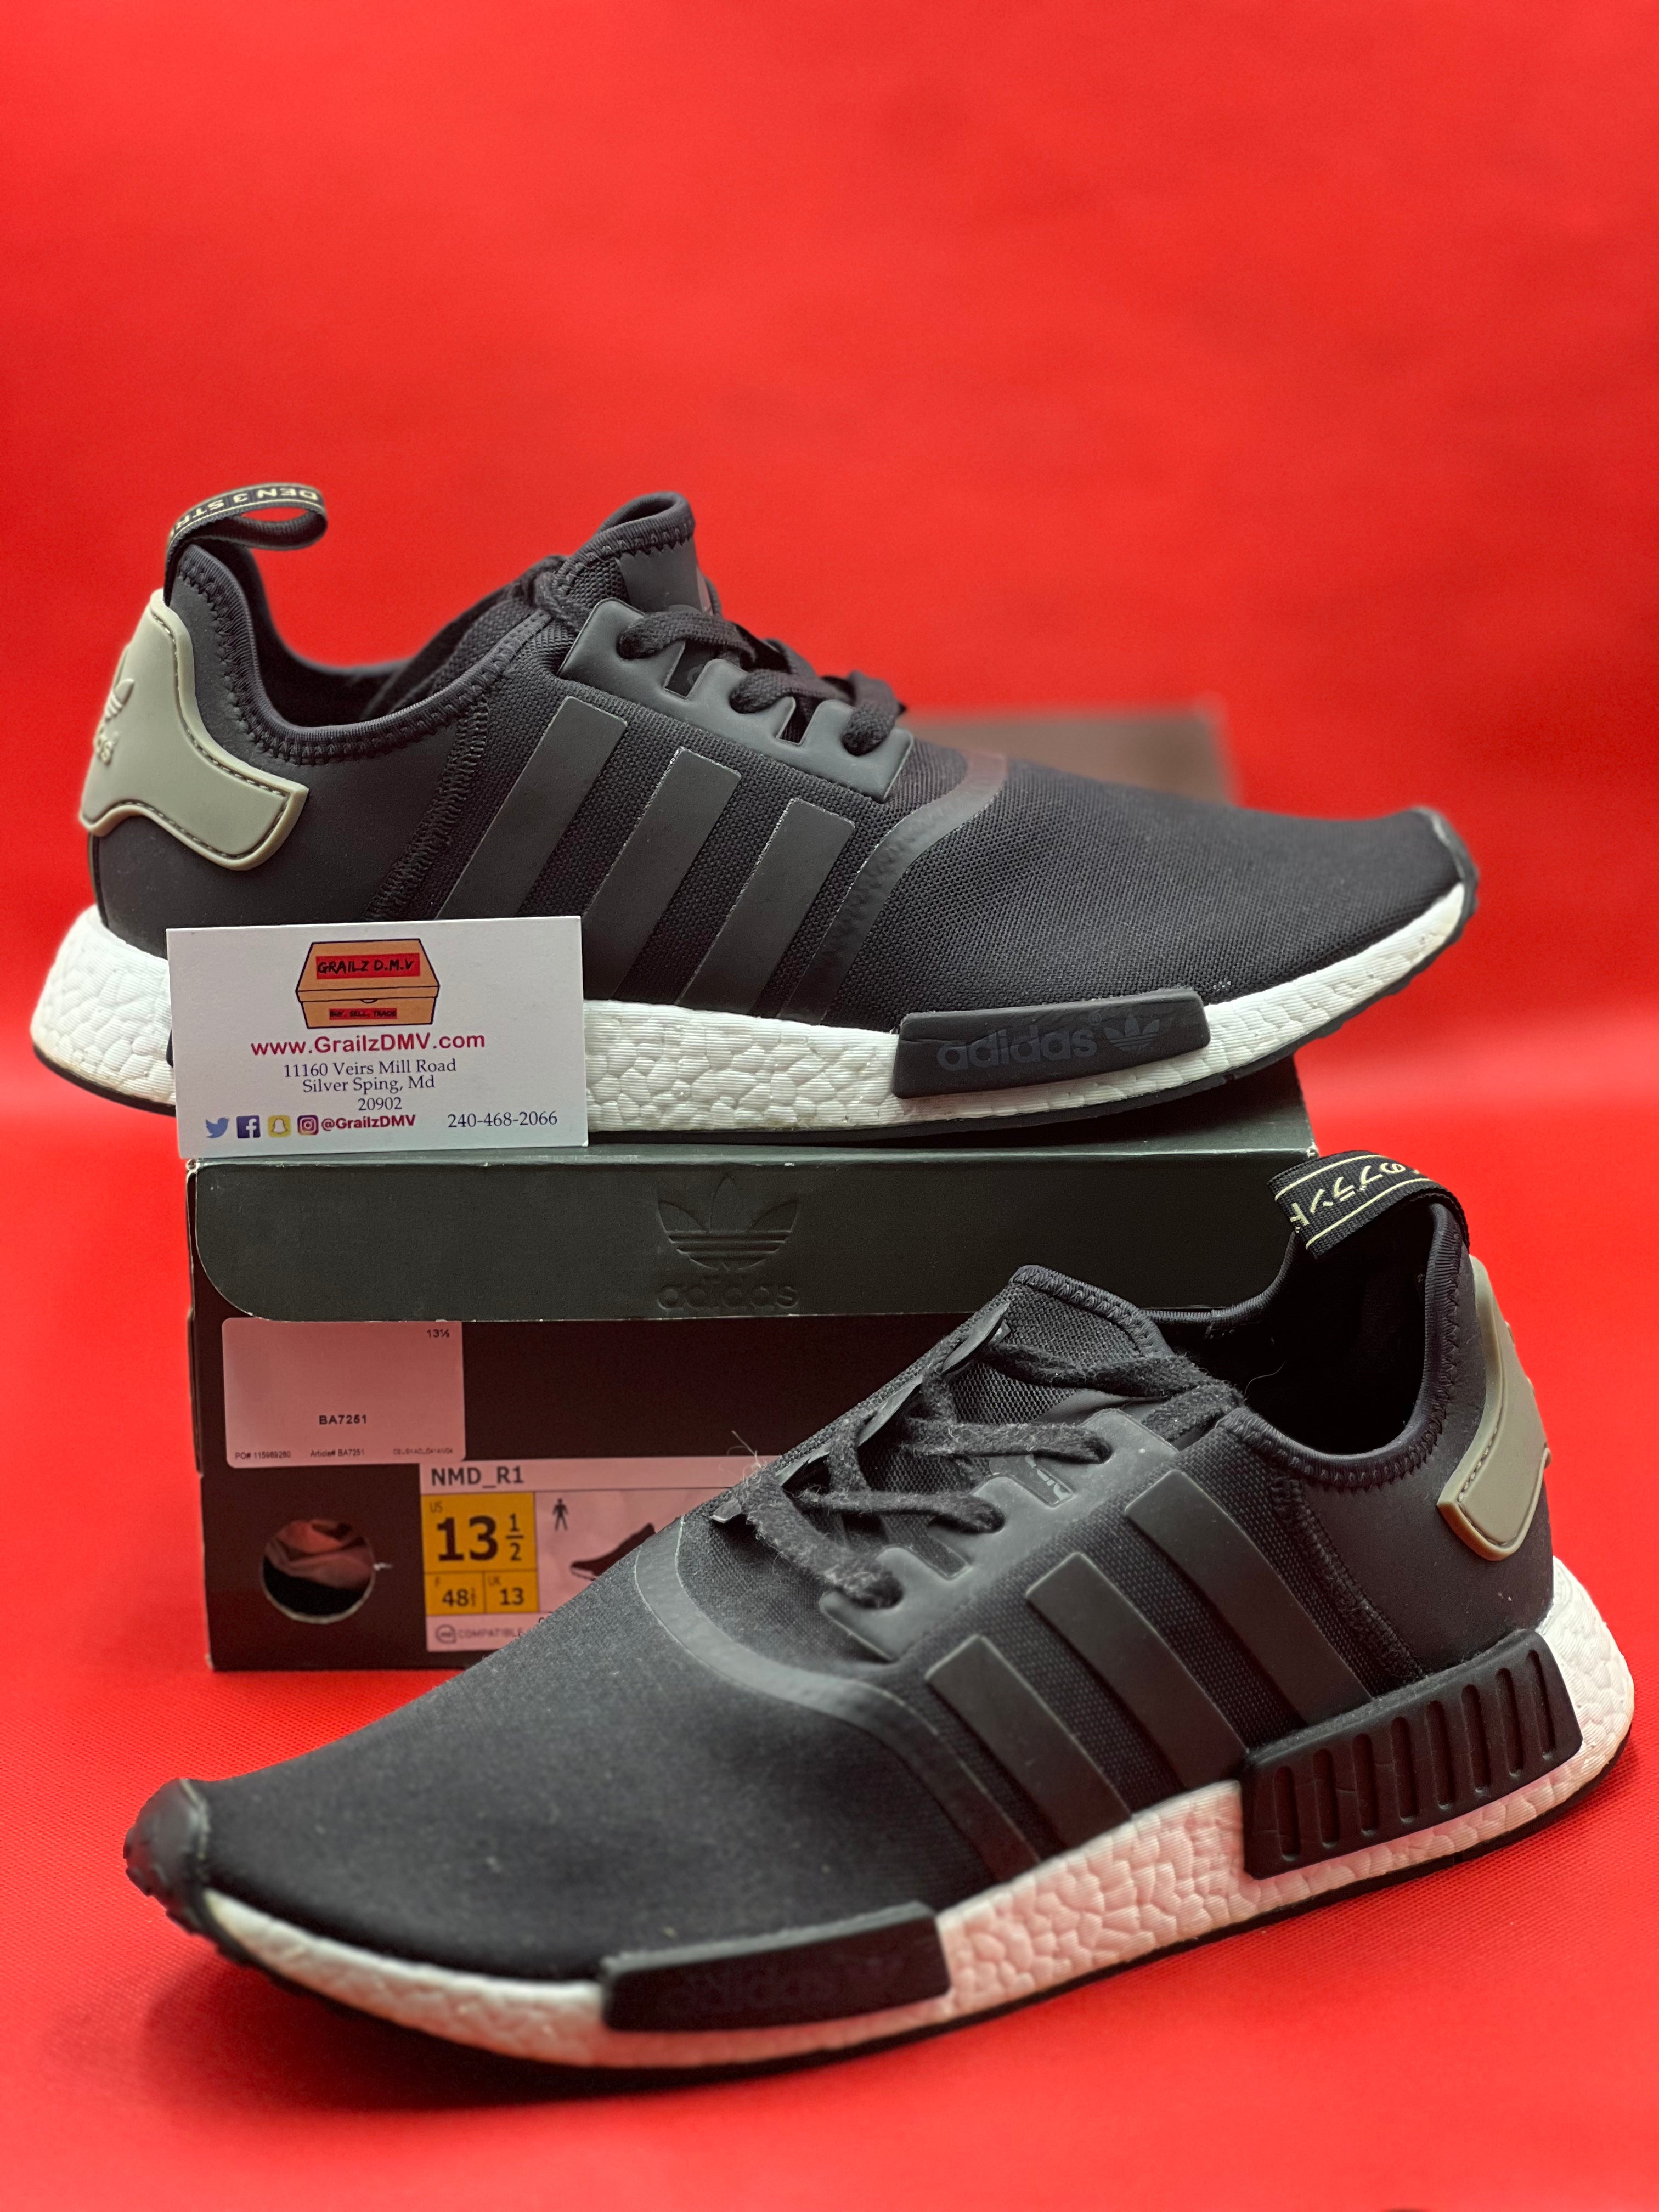 NMD R1 Black Trace Cargo Size 13.5